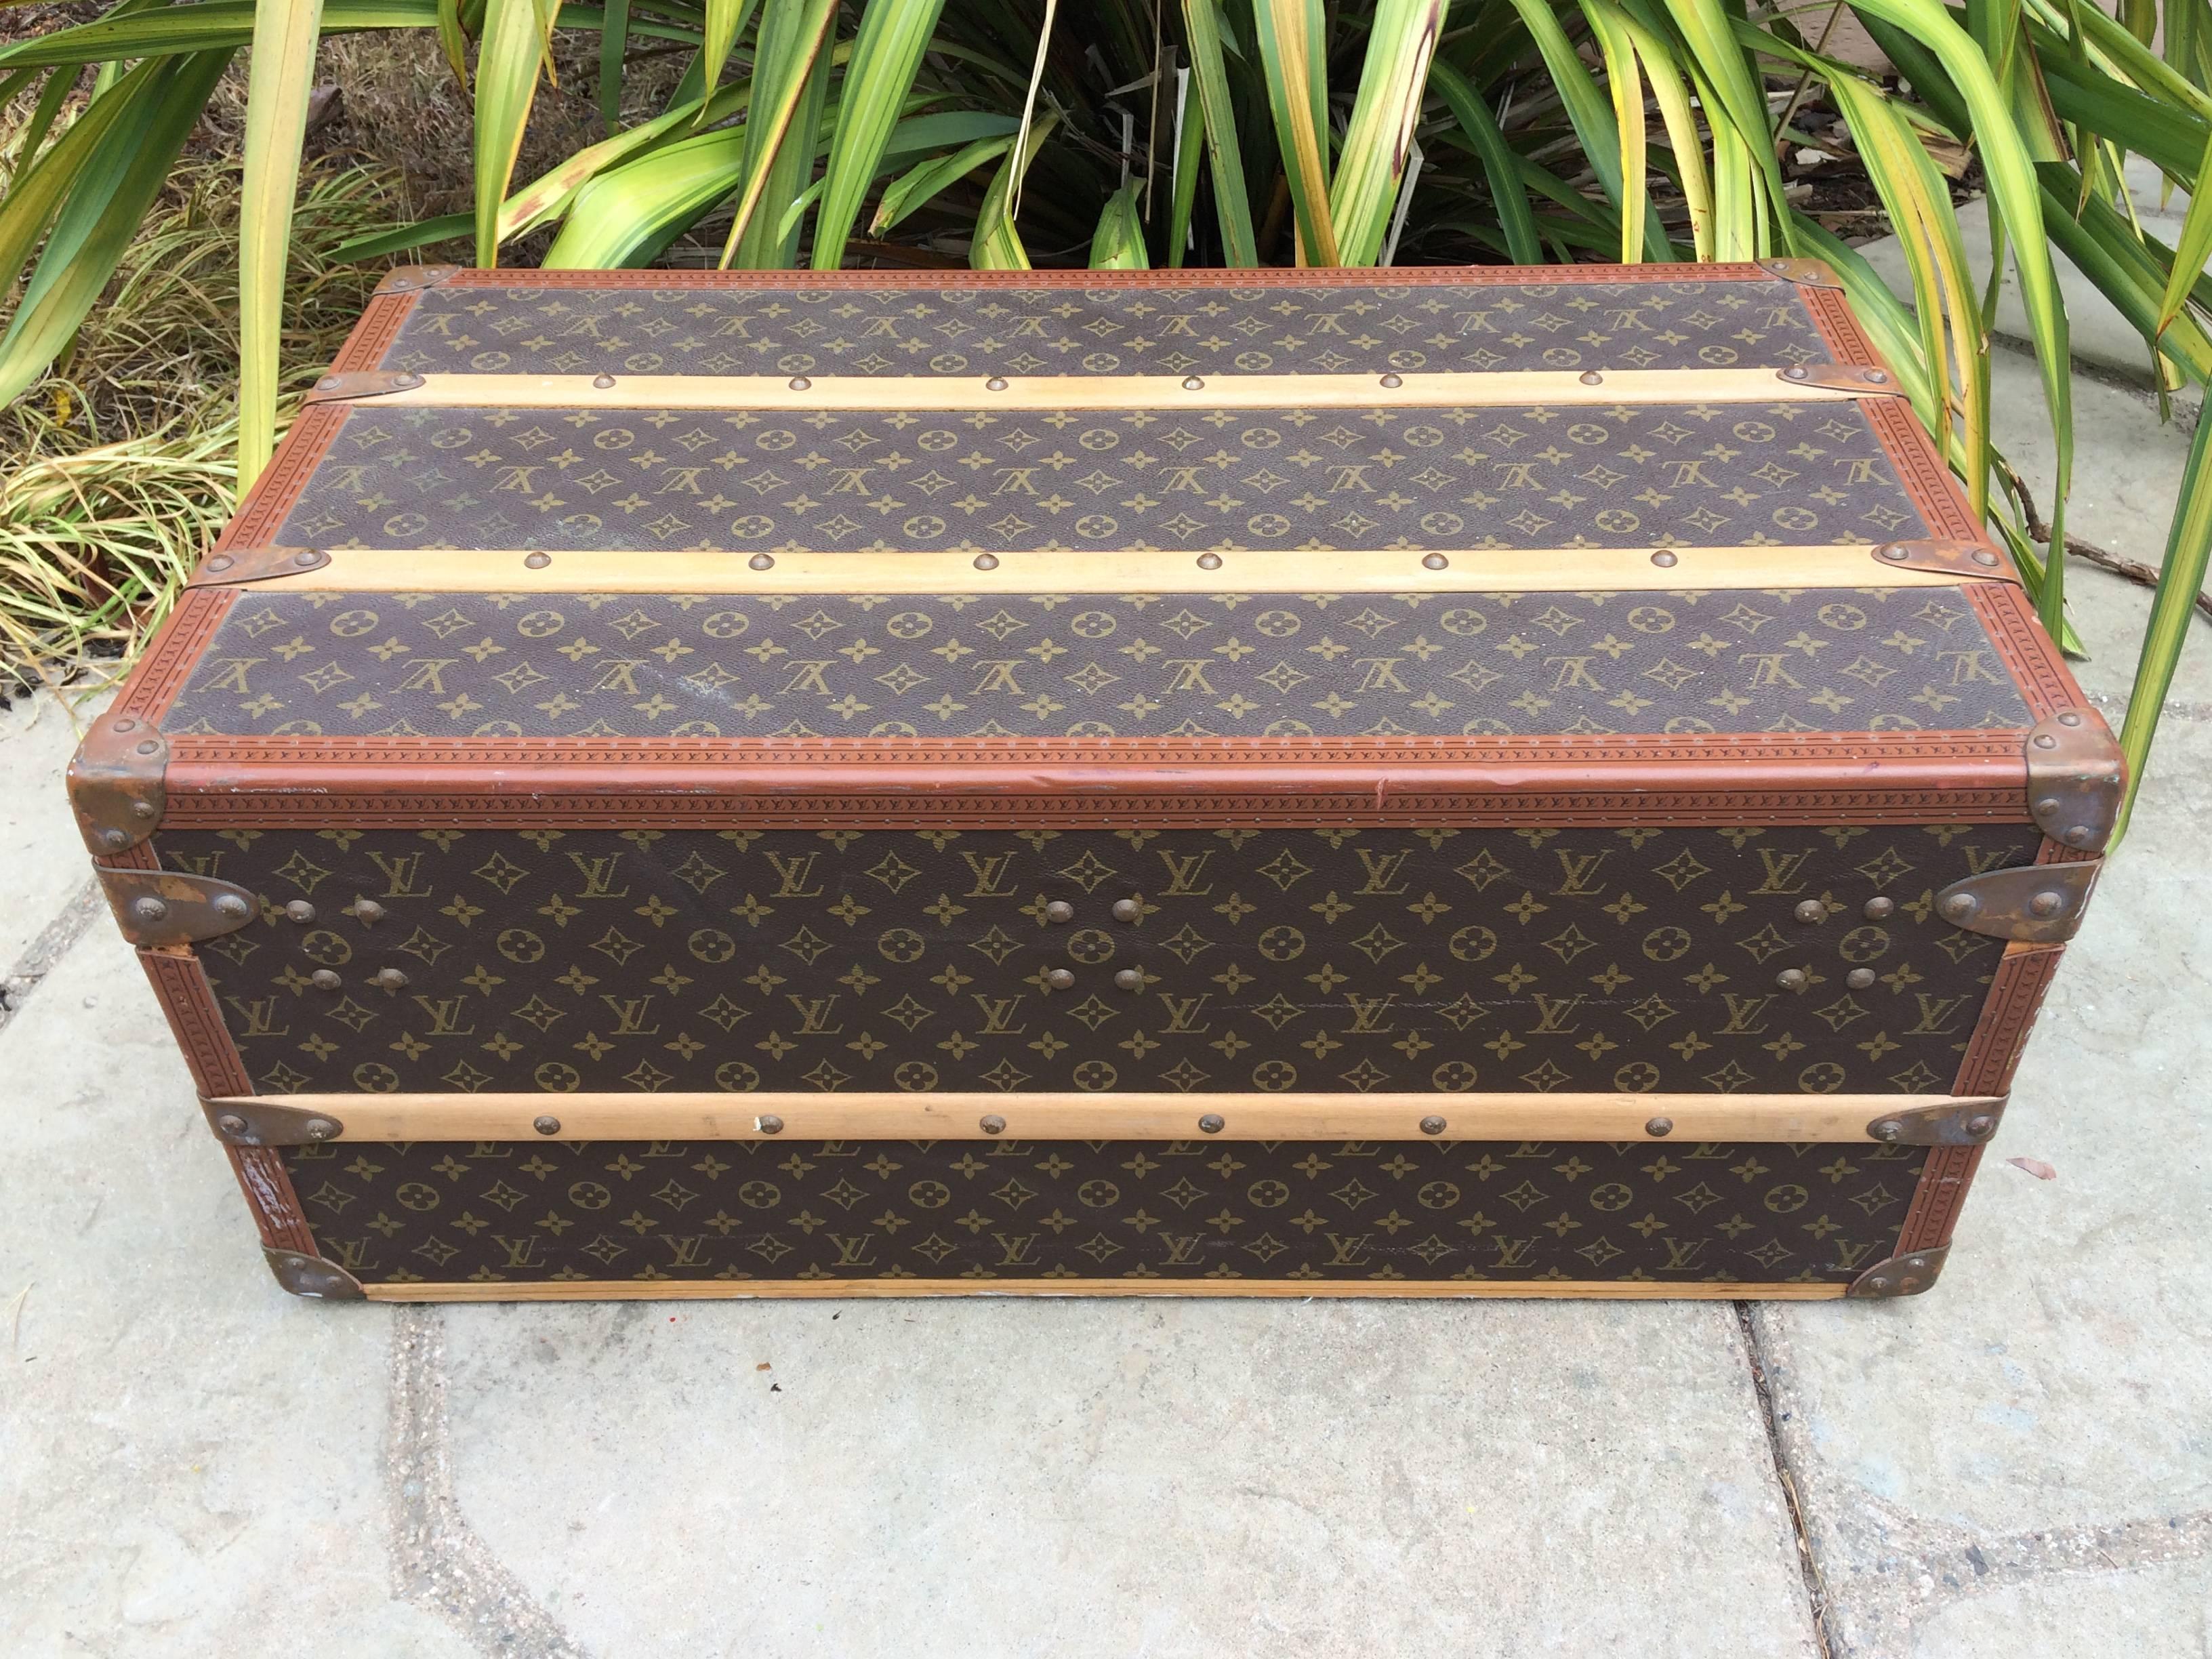 Louis Vuitton Antique Monogram Cabin Steamer Trunk Goyard Purse bag suitcase  In Excellent Condition For Sale In Carmel-by-the-sea, CA